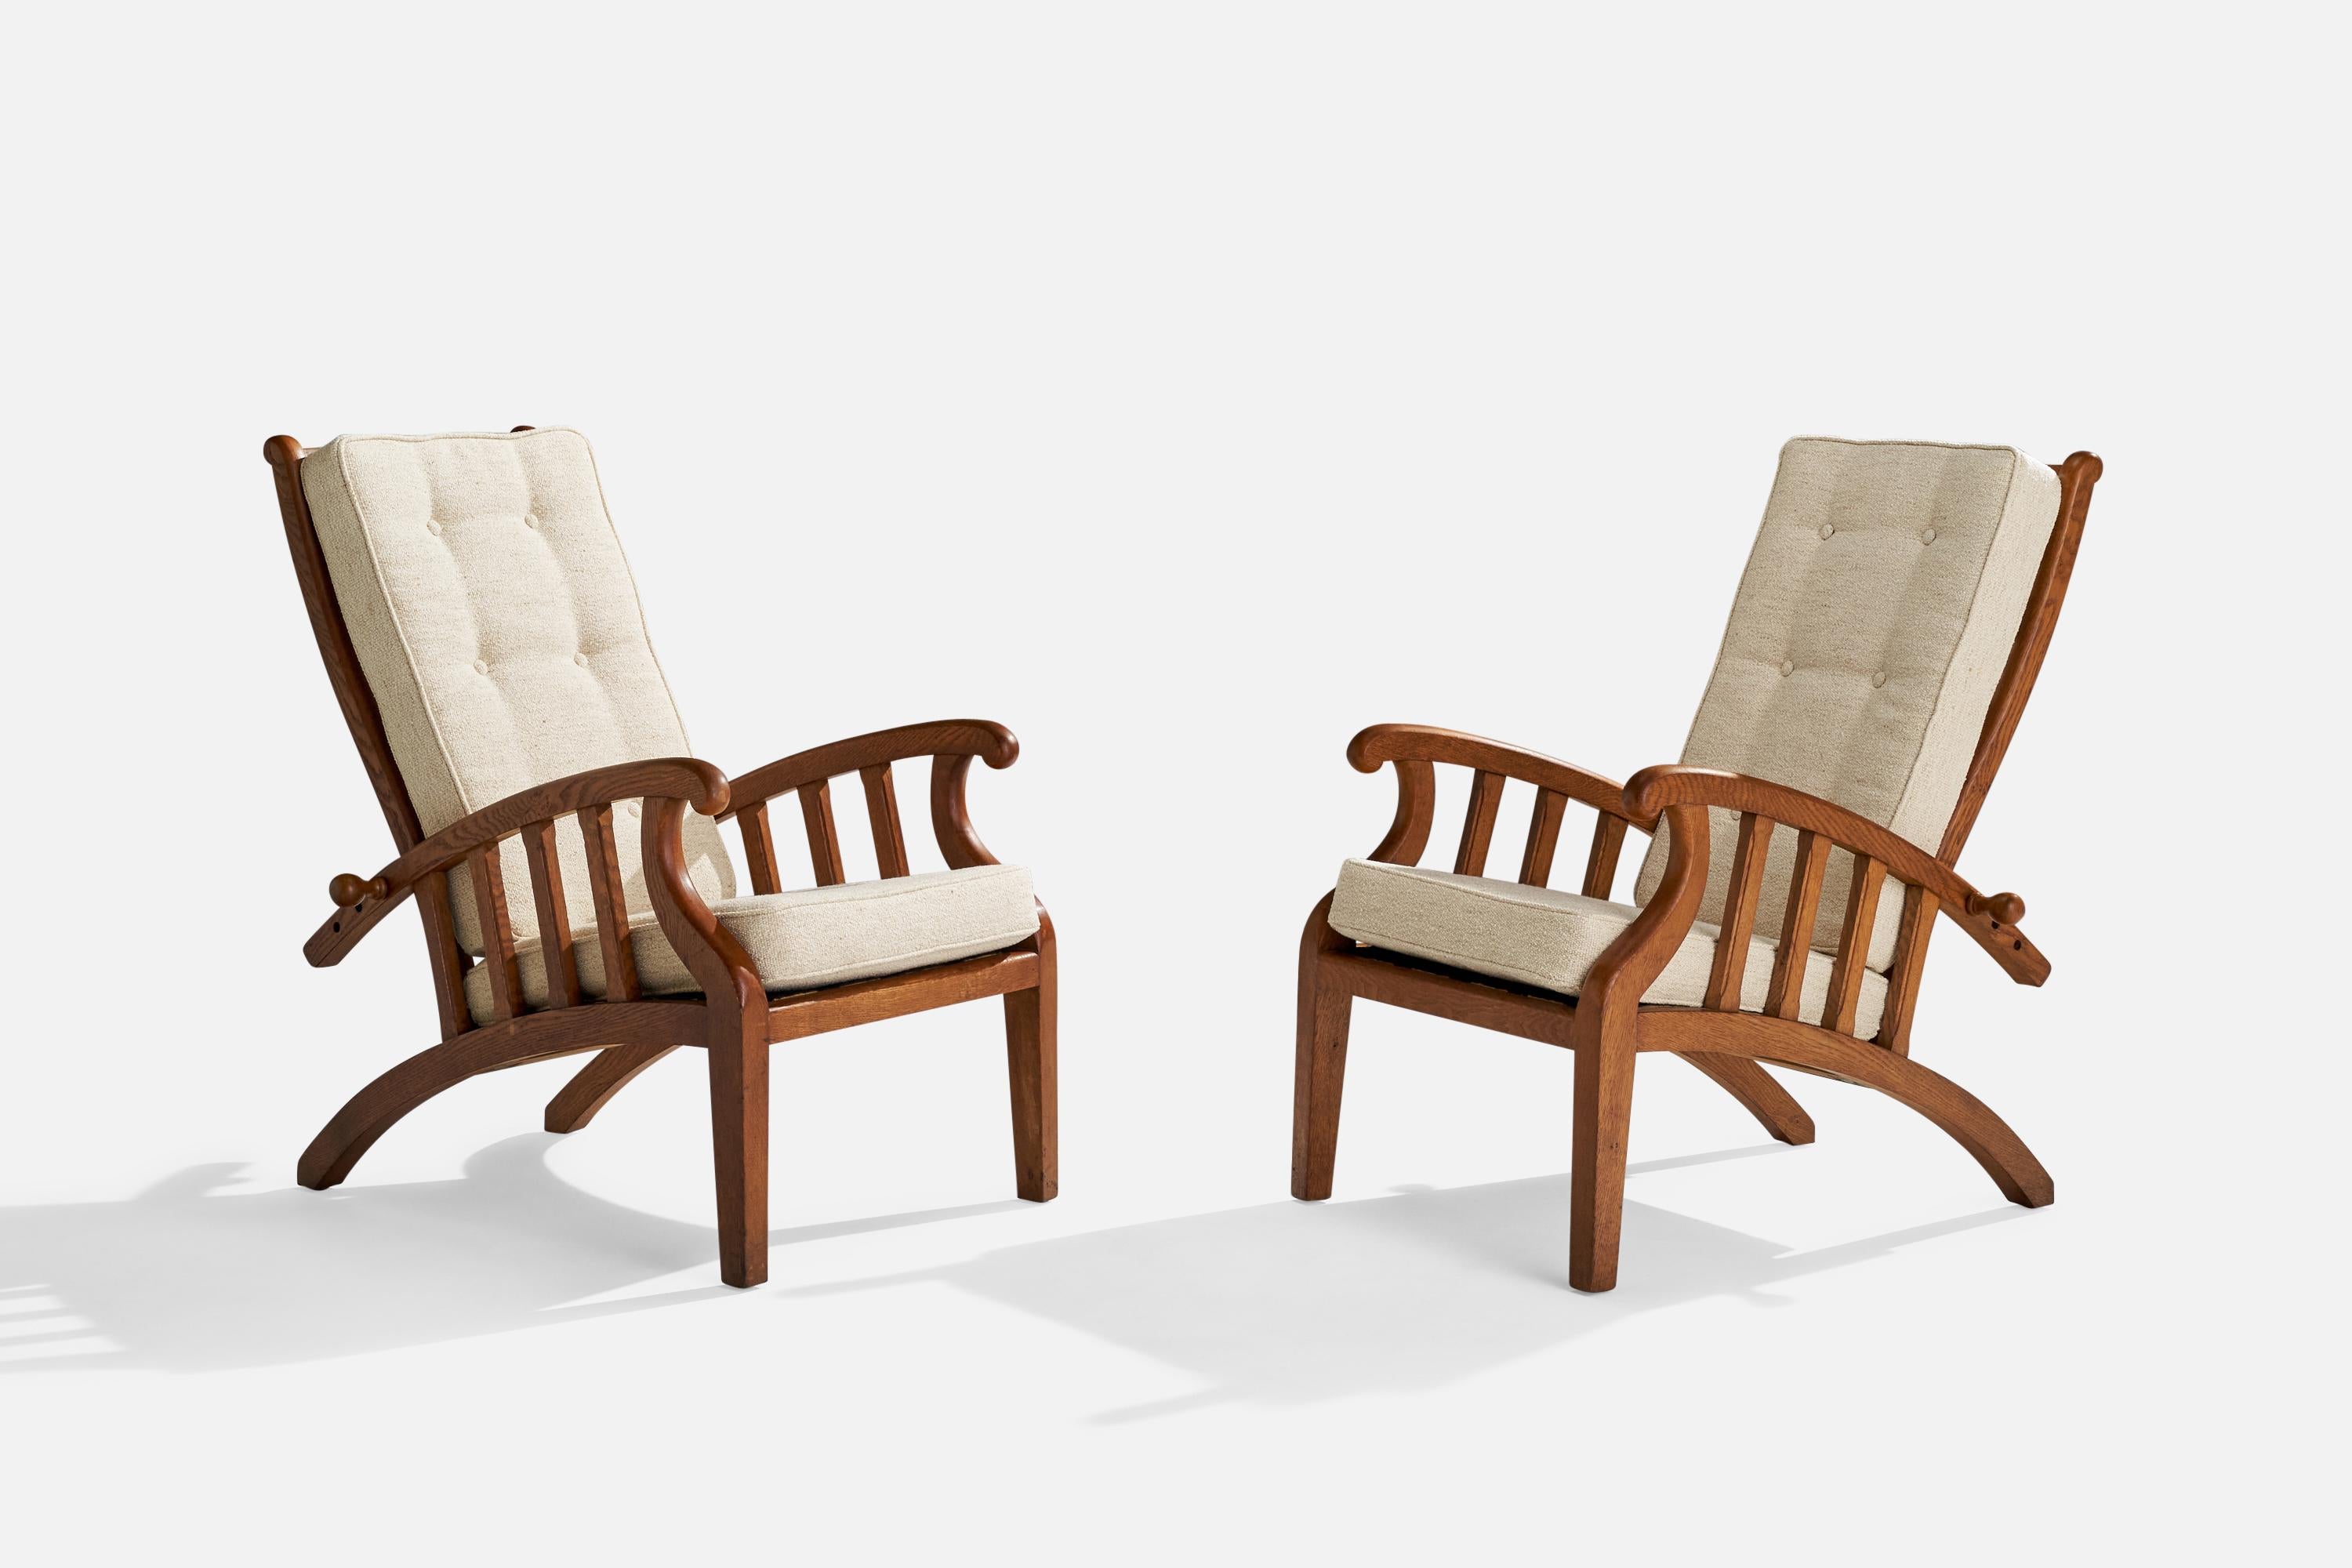 A pair of adjustable stained oak and white fabric lounge chairs designed and produced in Denmark, c. 1920s.

Seat height 17.5”.